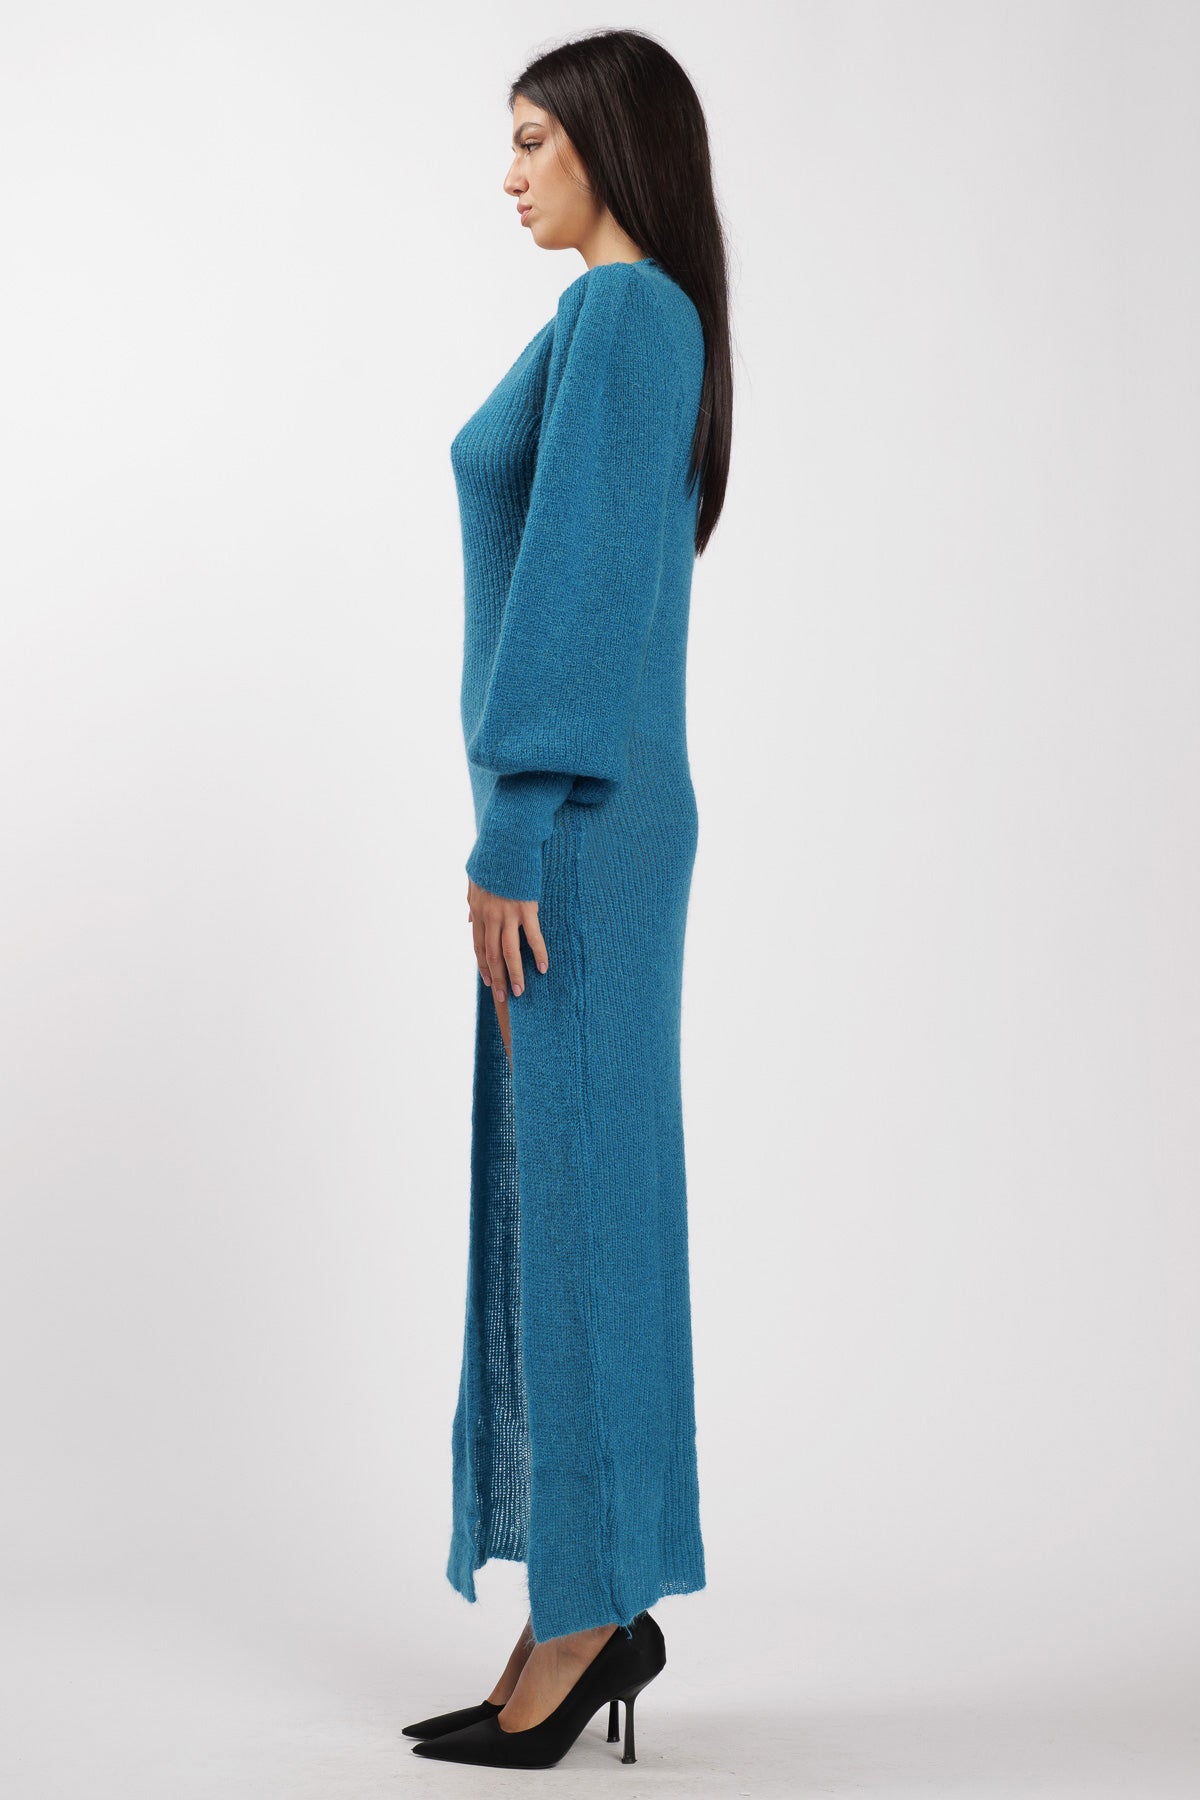 Wool Dress with Peacock Slit